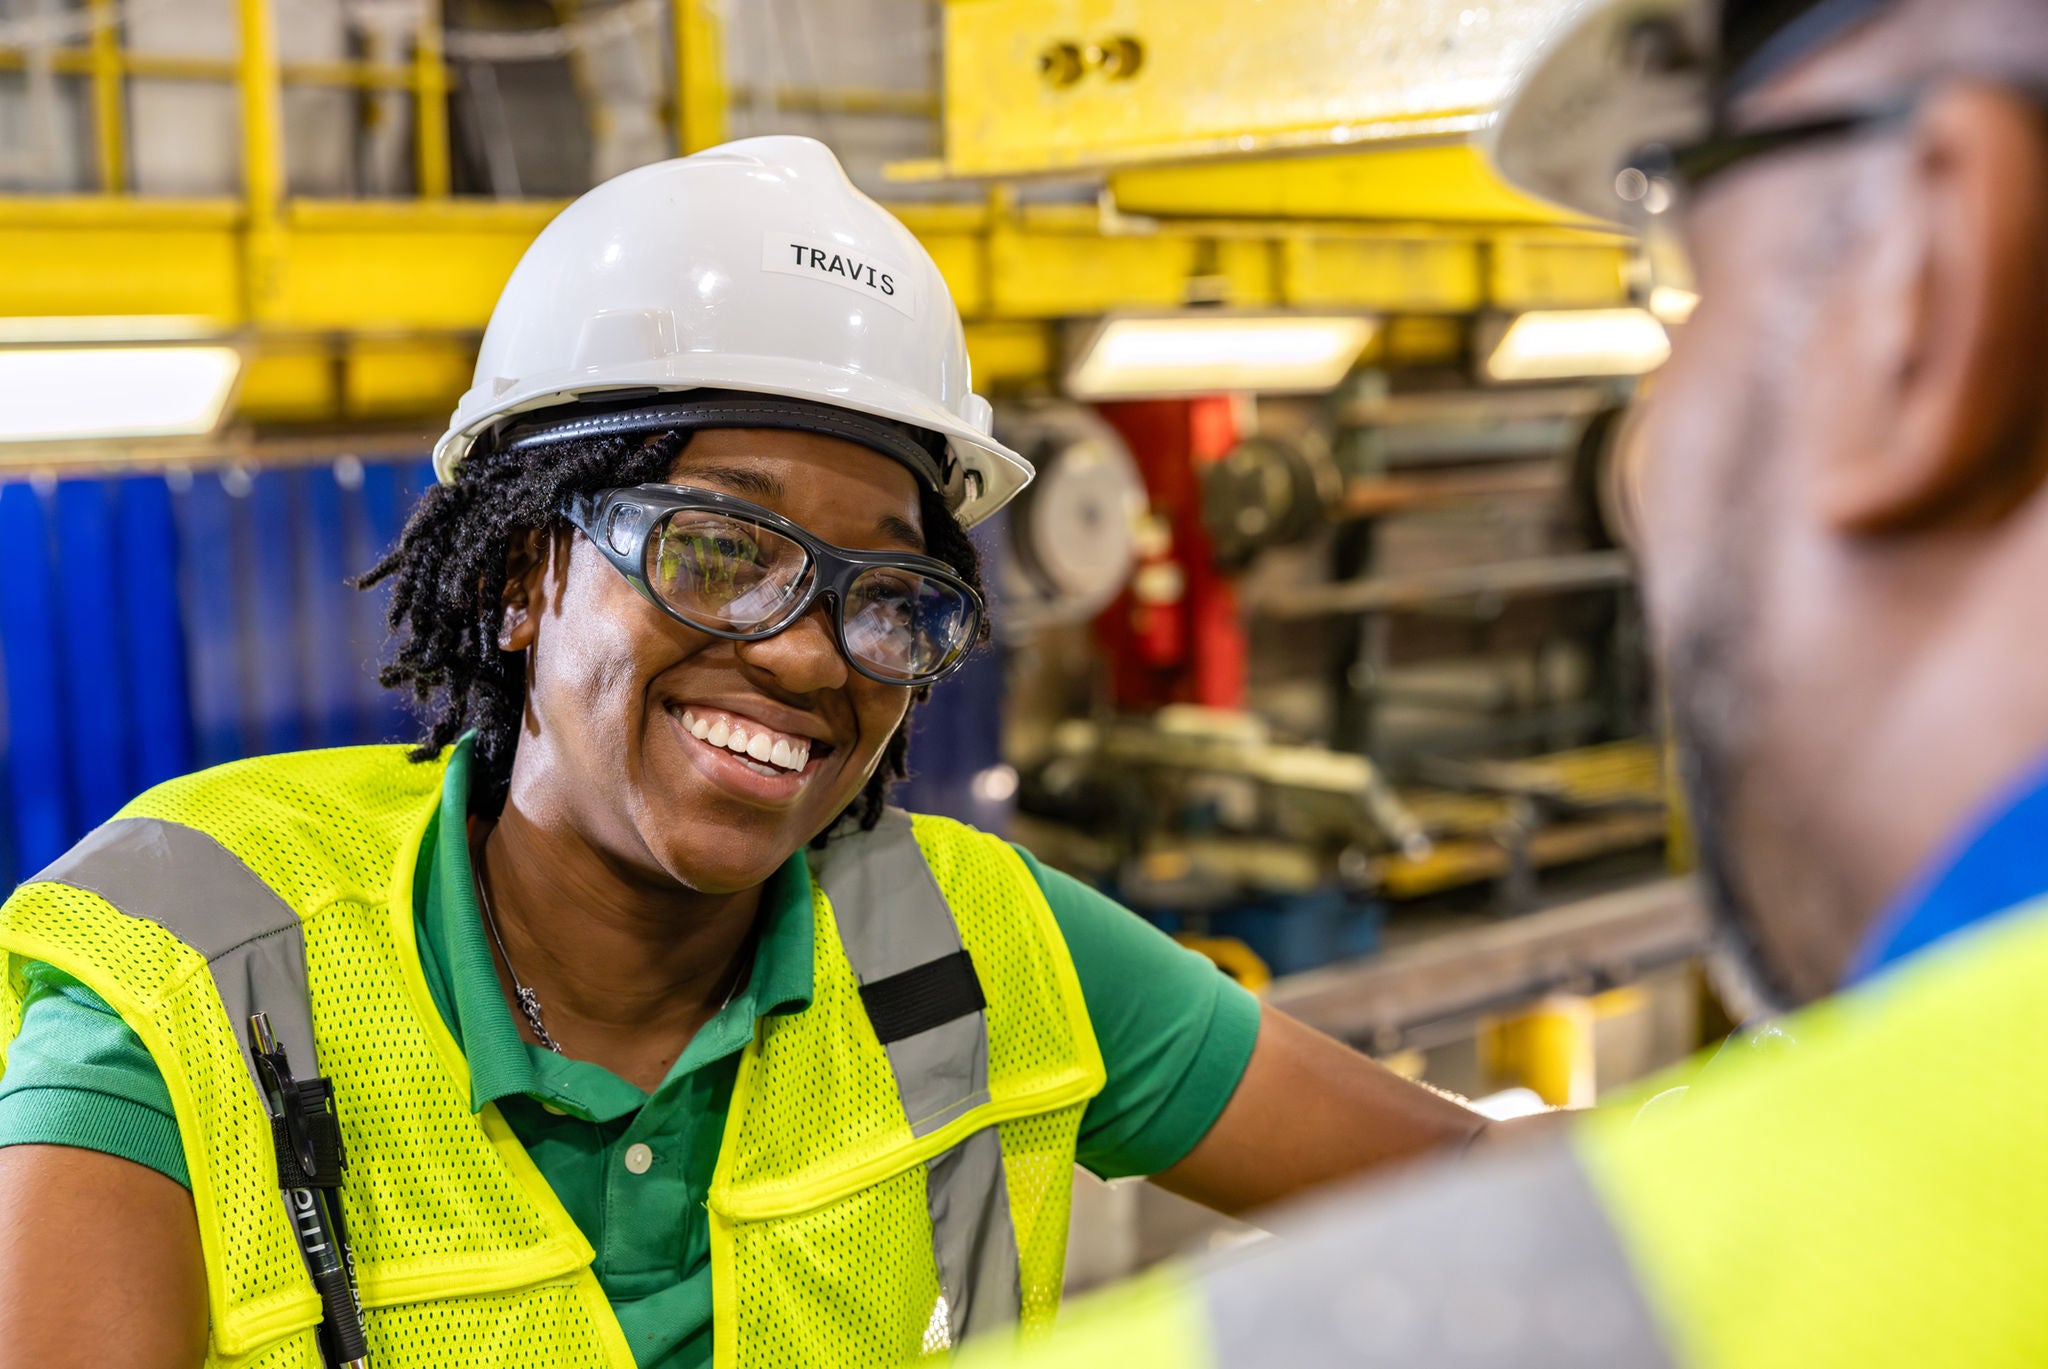 norfolk southern ops employee woman in railway job and dispatcher job smiling with safety gear